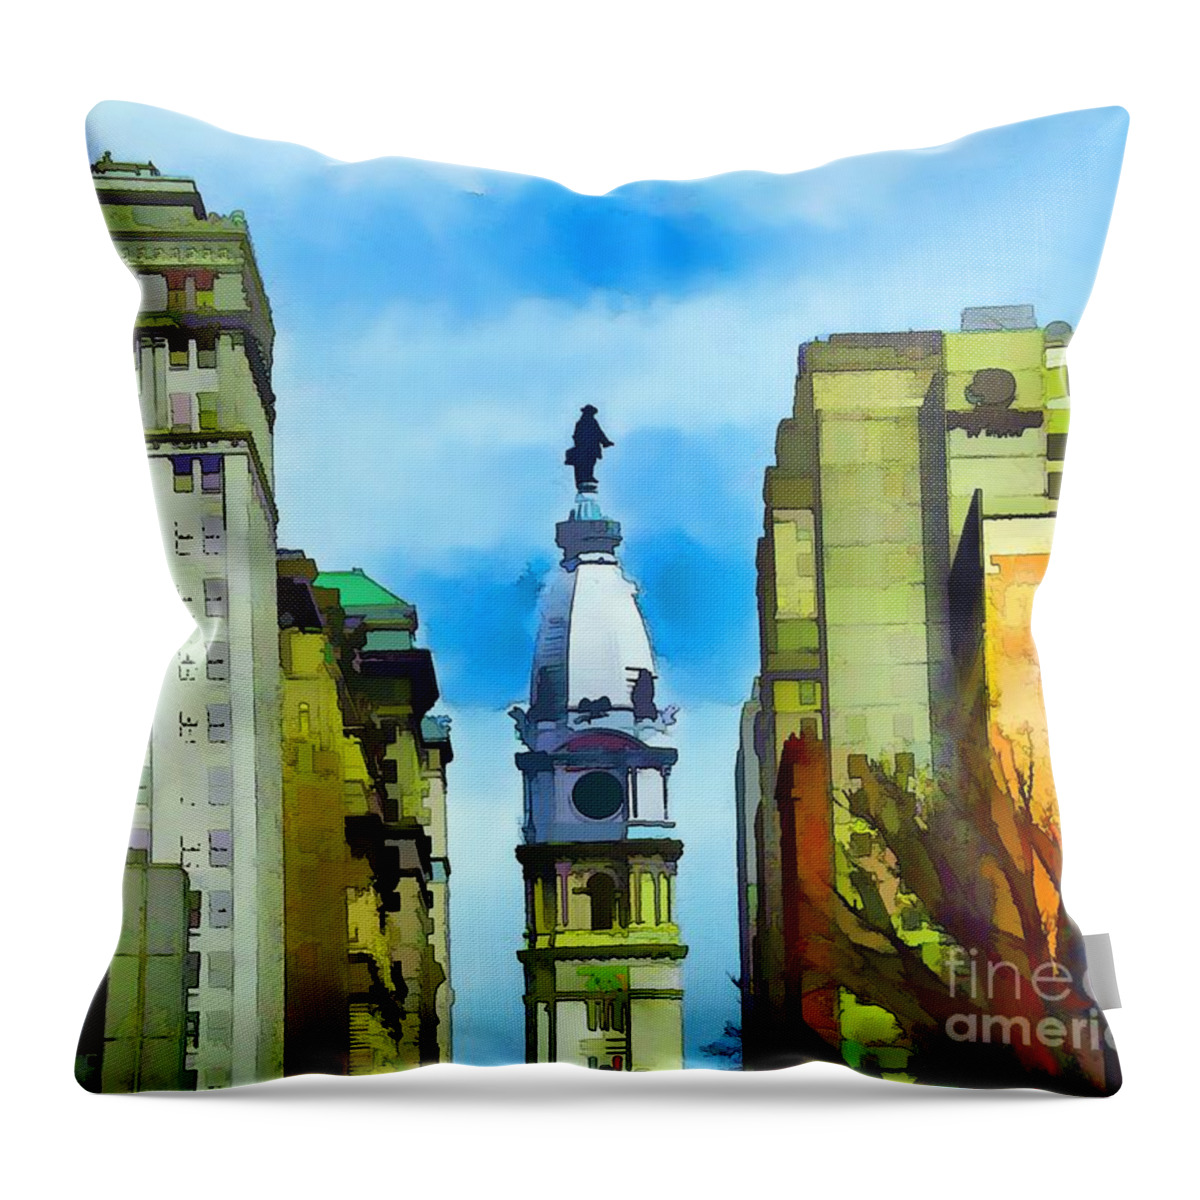 Spirit Of Philly Throw Pillow featuring the painting Spirit Of Philly by Robyn King